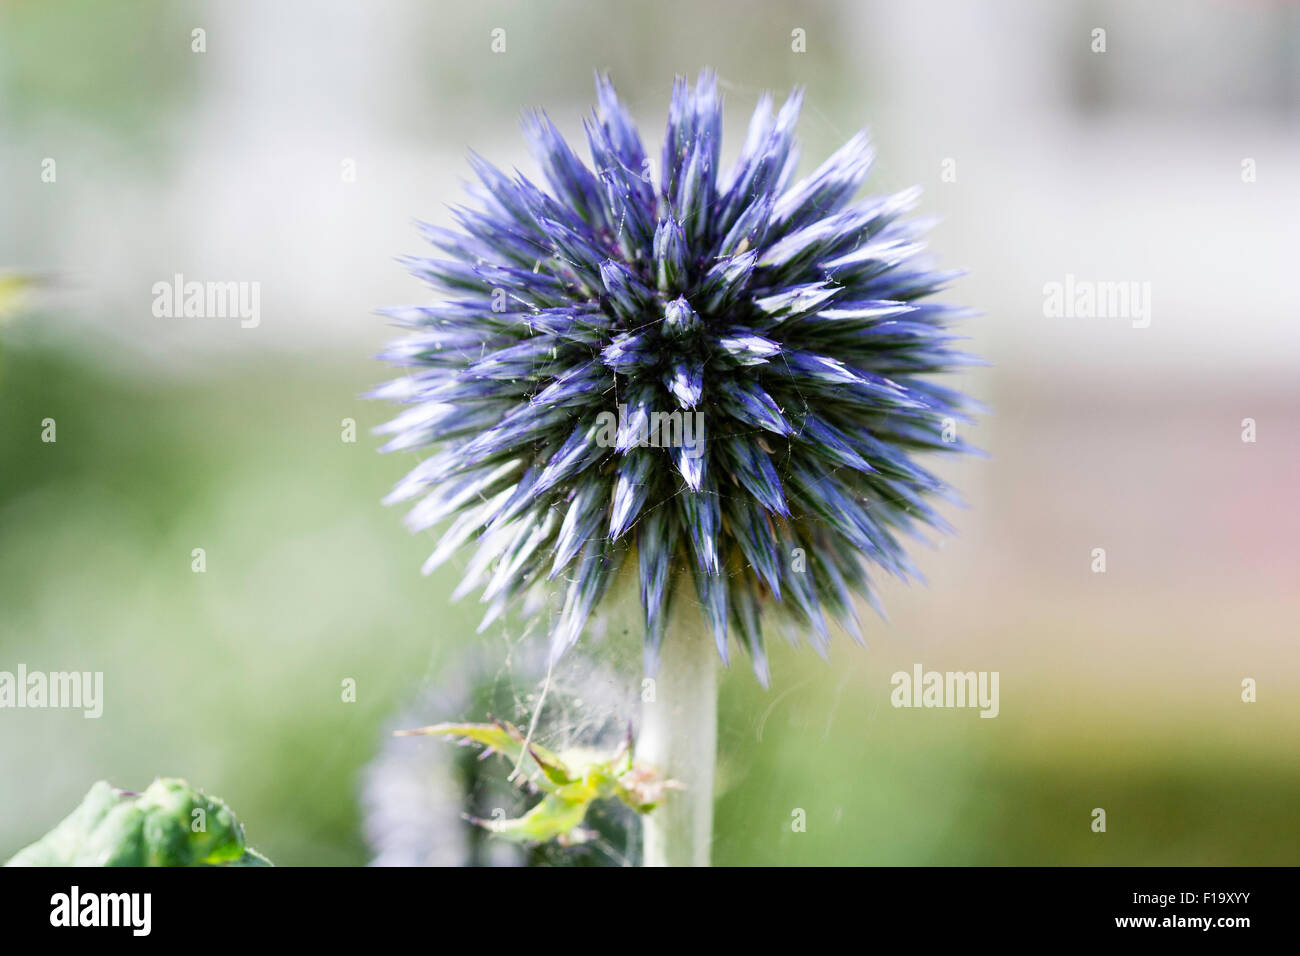 Garden flower. Echinops ritro 'Veitch's blue'. Close up of blue mauve flower-head, spikes and talks in round globe pattern Stock Photo